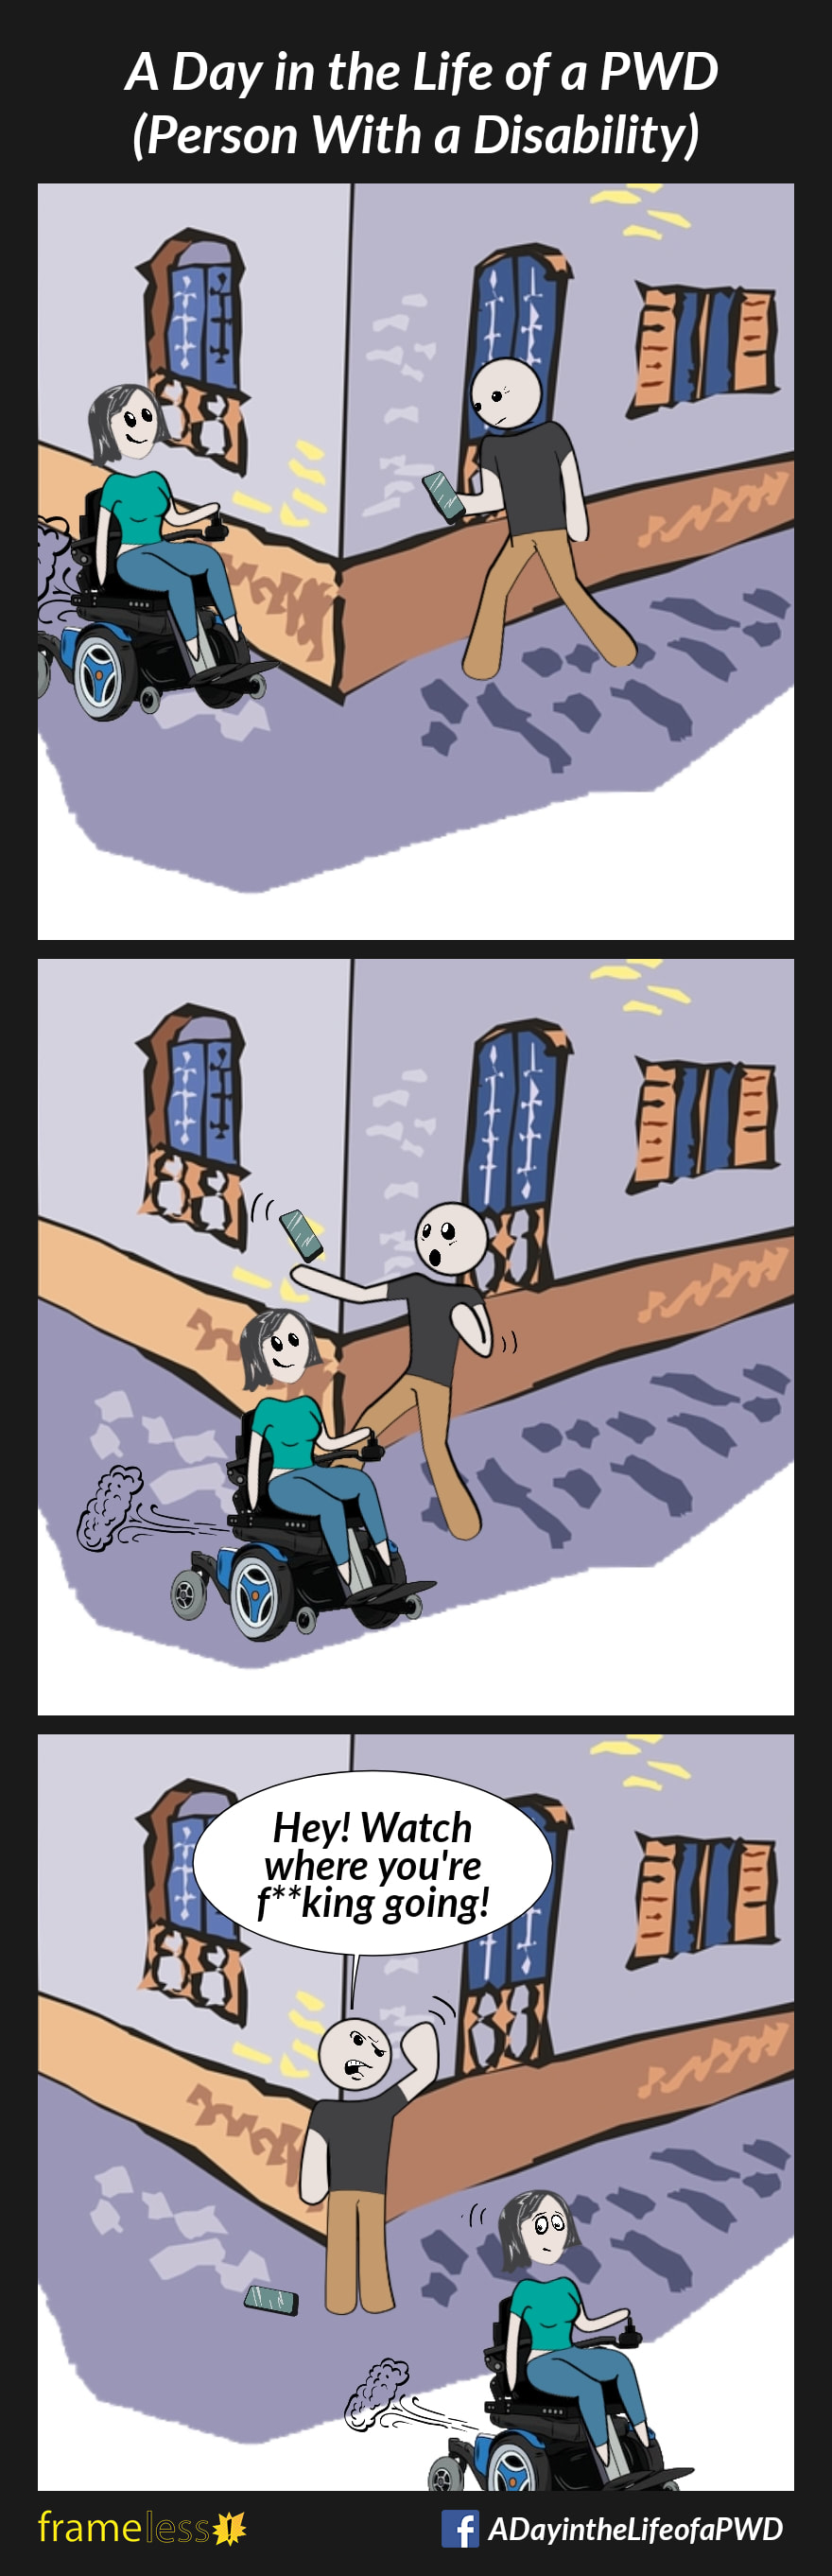 COMIC STRIP 
A Day in the Life of a PWD (Person With a Disability) 

Frame 1:
A woman in a power wheelchair is traveling down a sidewalk beside a building. Around the corner of the building, a man is walking while looking down at his cell phone.

Frame 2:
At the corner of the building, the woman passes in front of the man, surprising him.

Frame 3:
As the woman continues on, the man gets angry and shakes his fist.
MAN: Hey! Watch where you're f**king going!